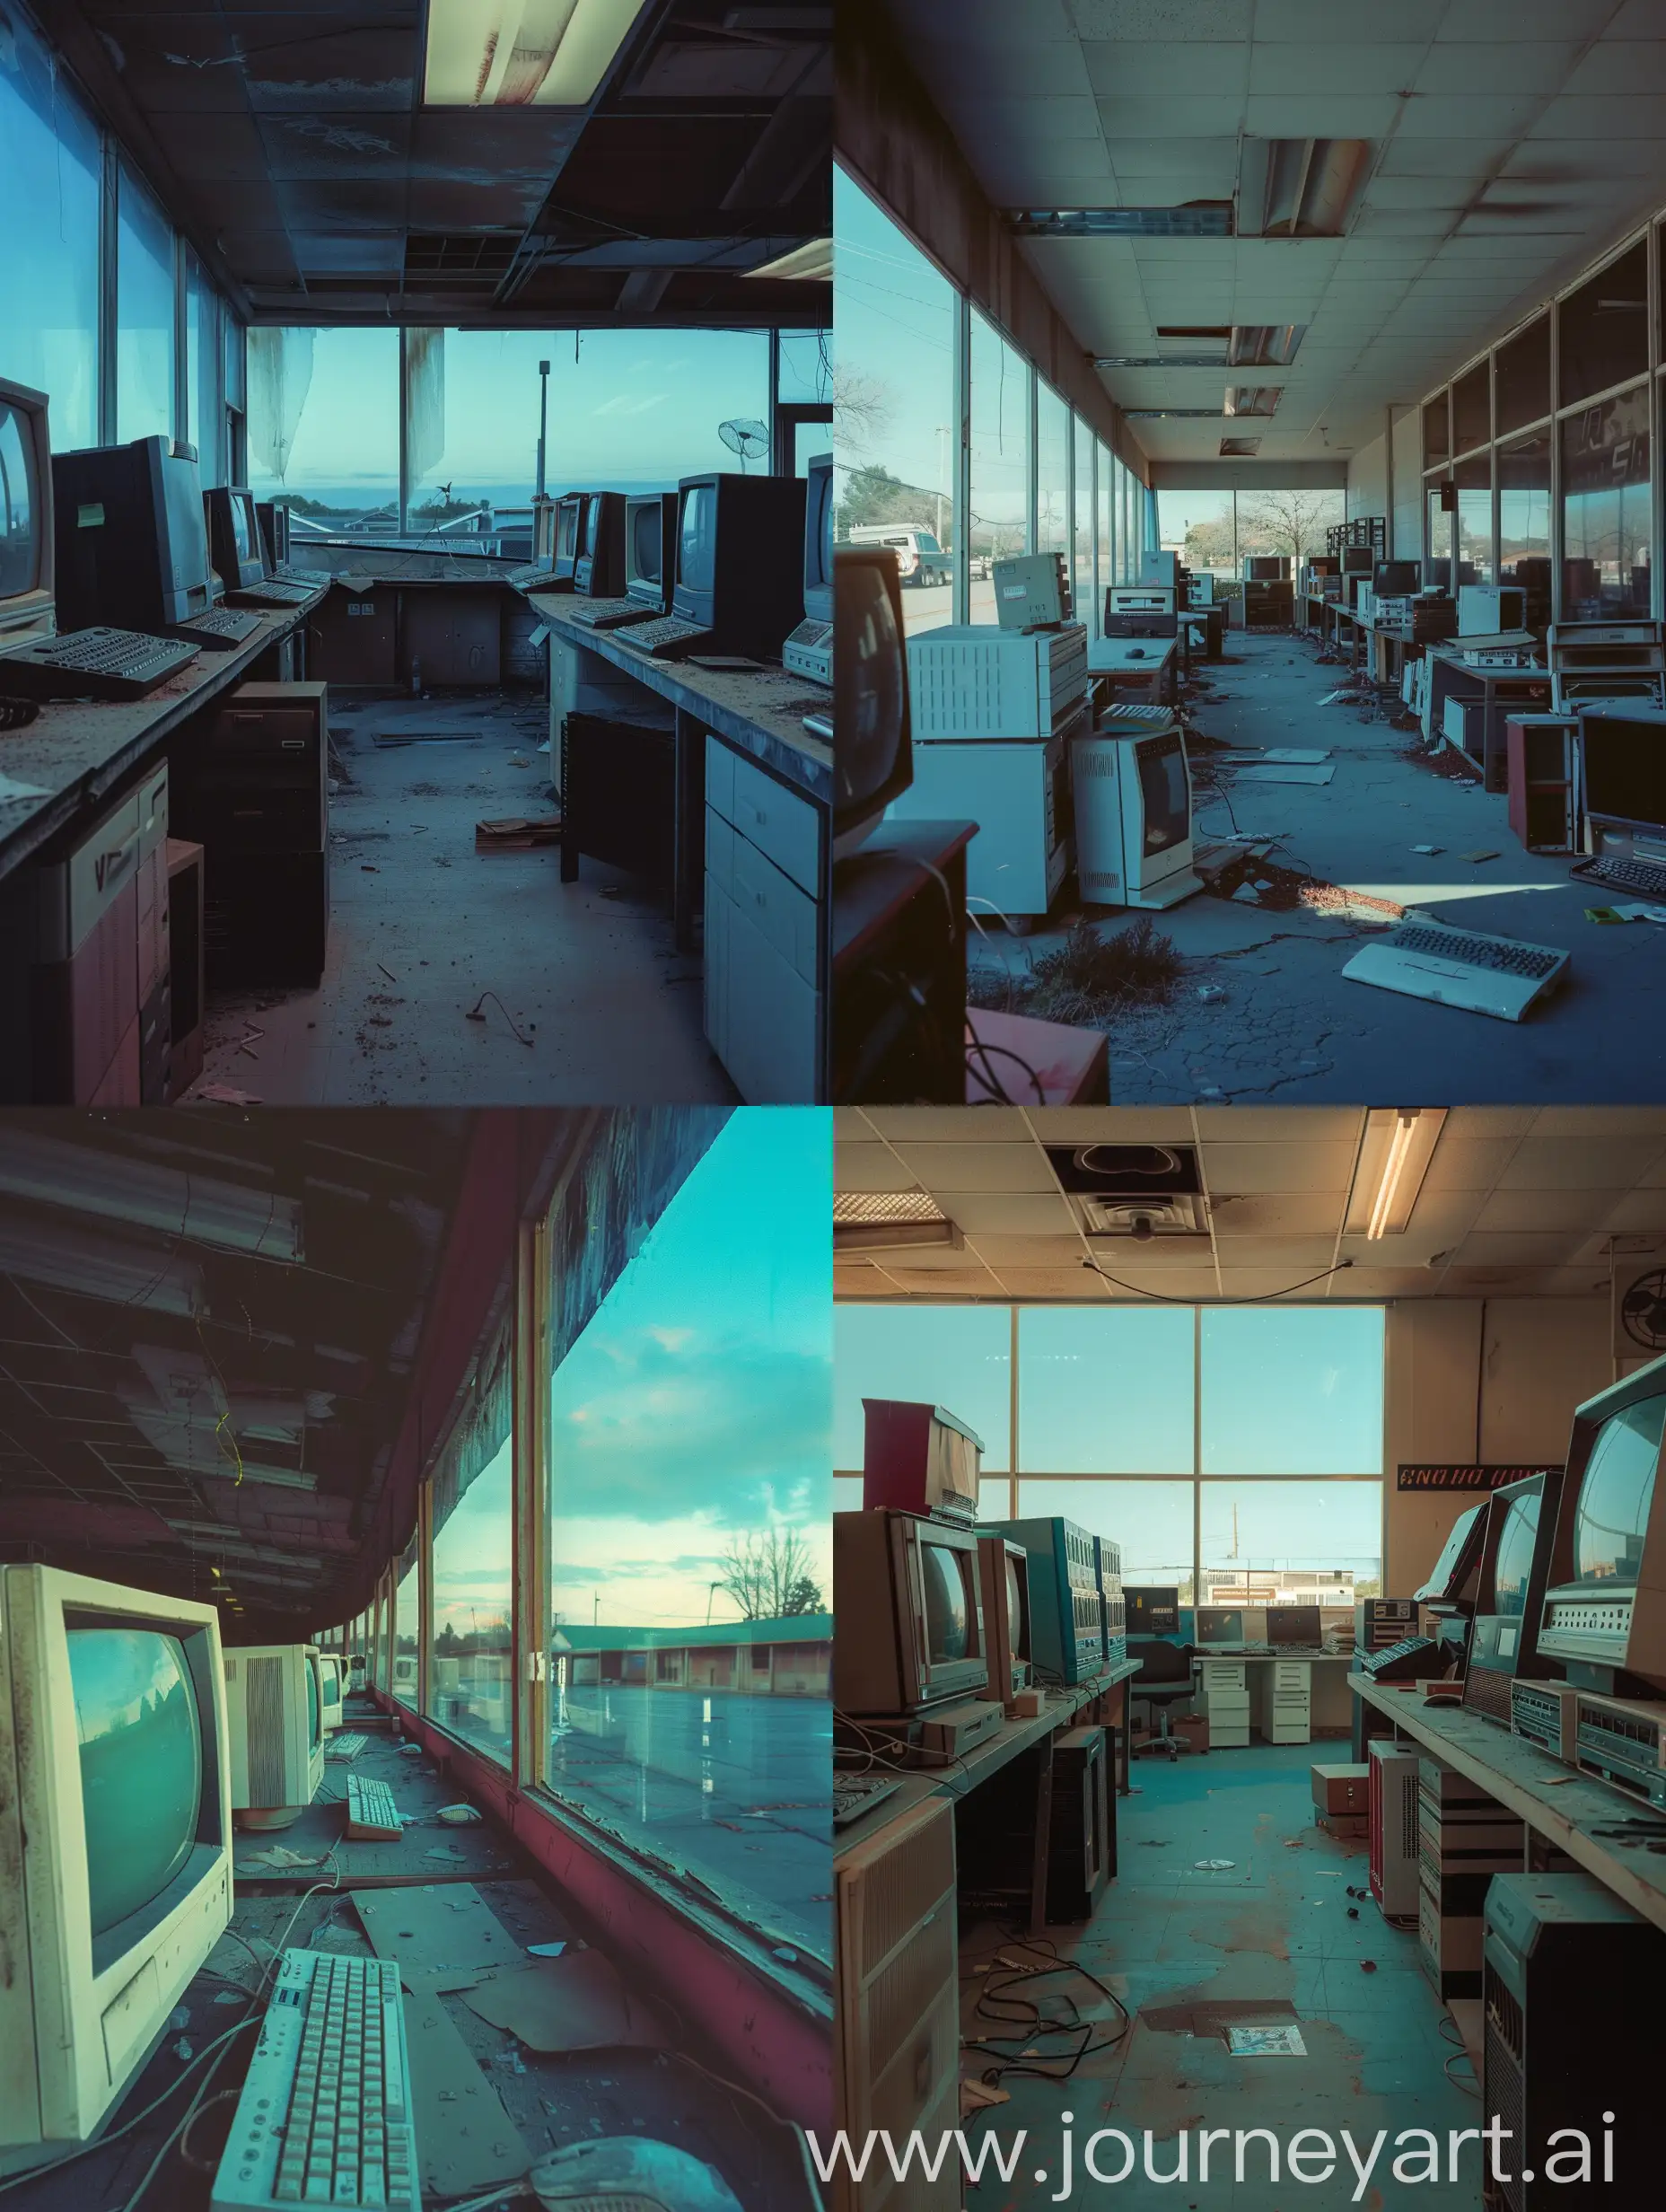 Early 2000s found footage, empty computer shop, muted blue sky tones